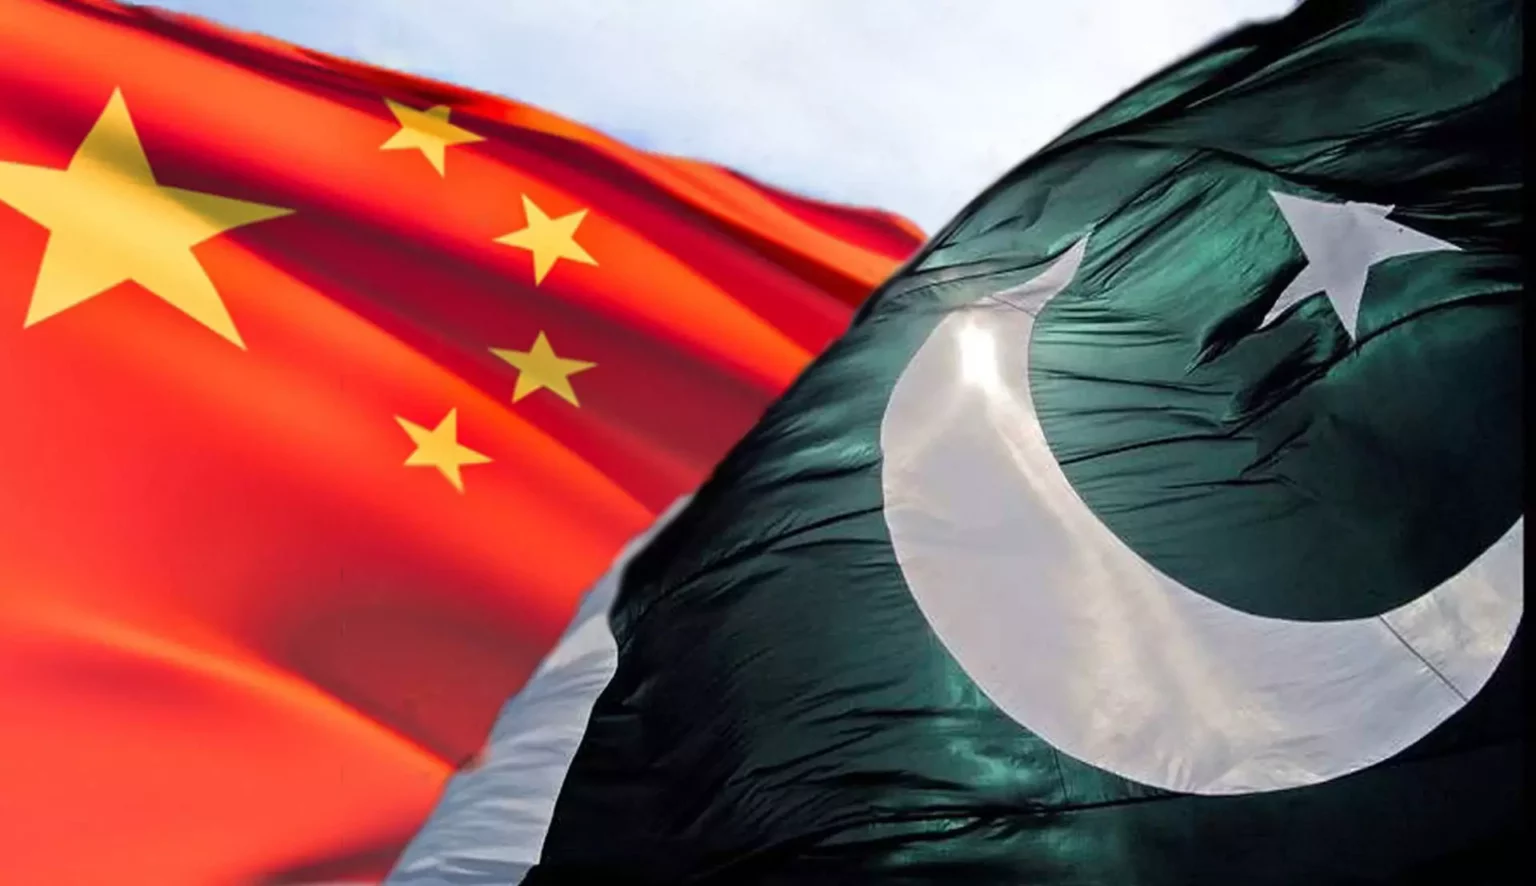 president-xi-jinping-says-china-willing-to-boost-pakistan-ties